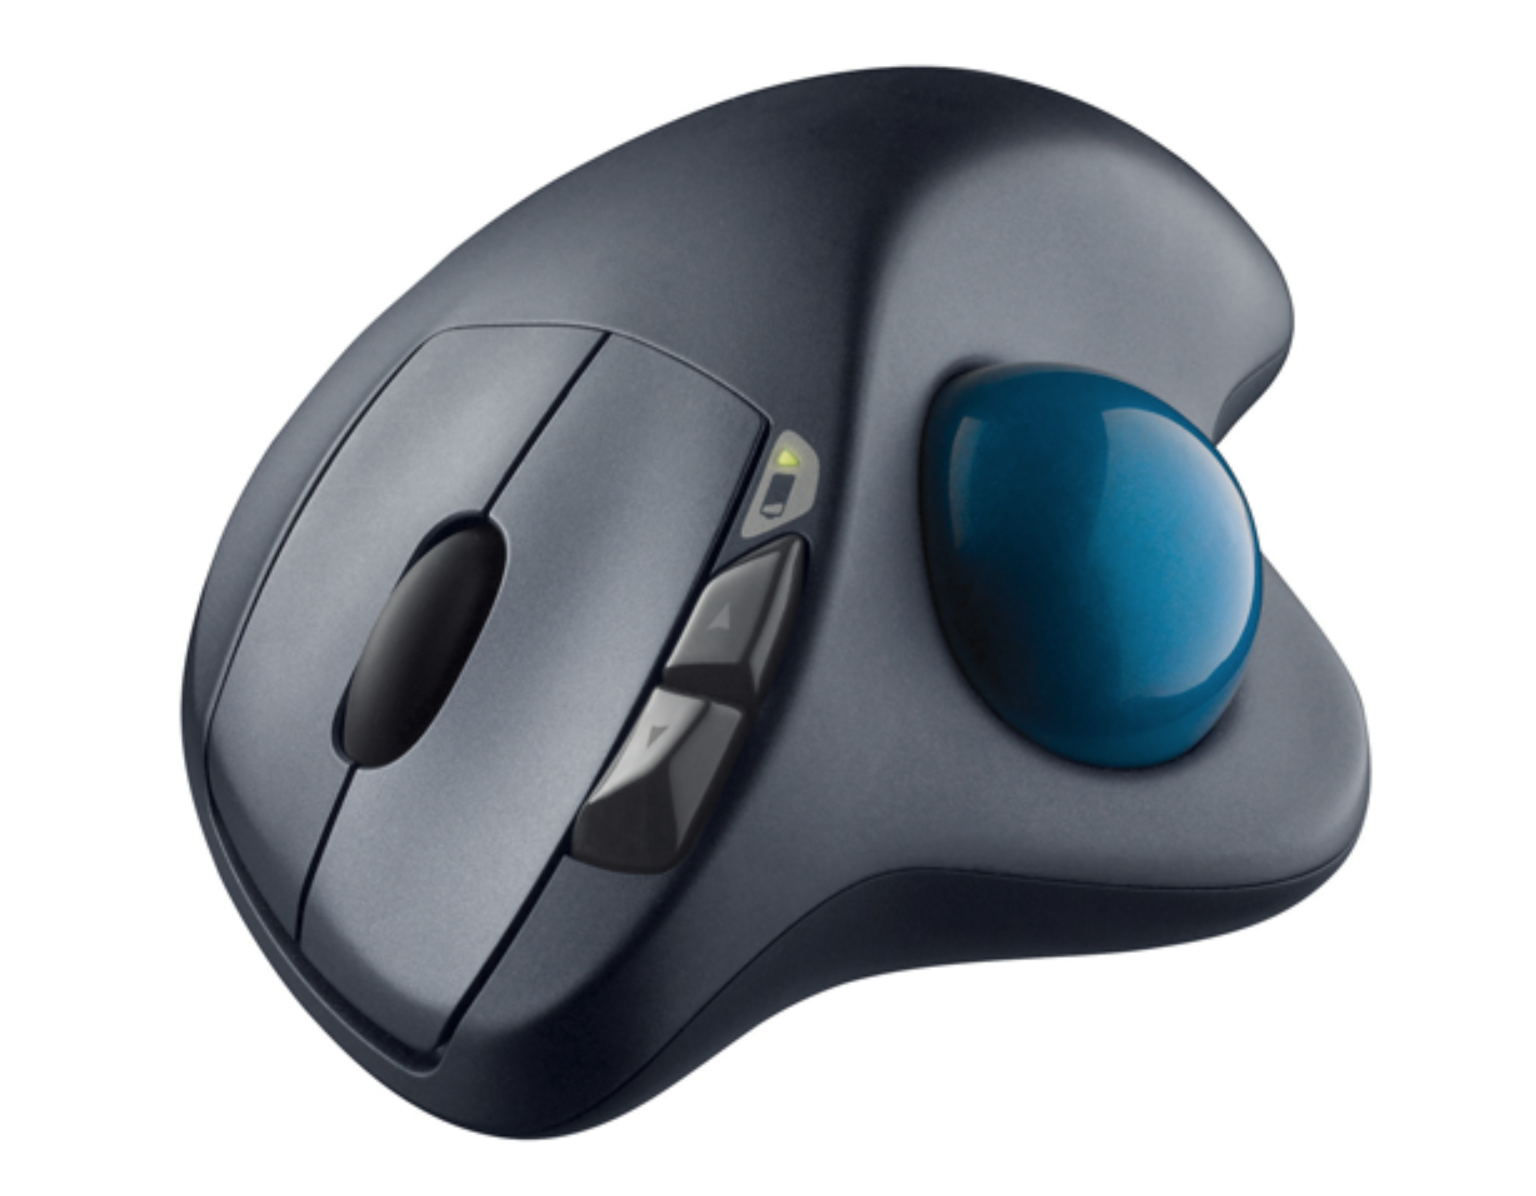 image of the Logitech M570 Wireless Trackball Mouse